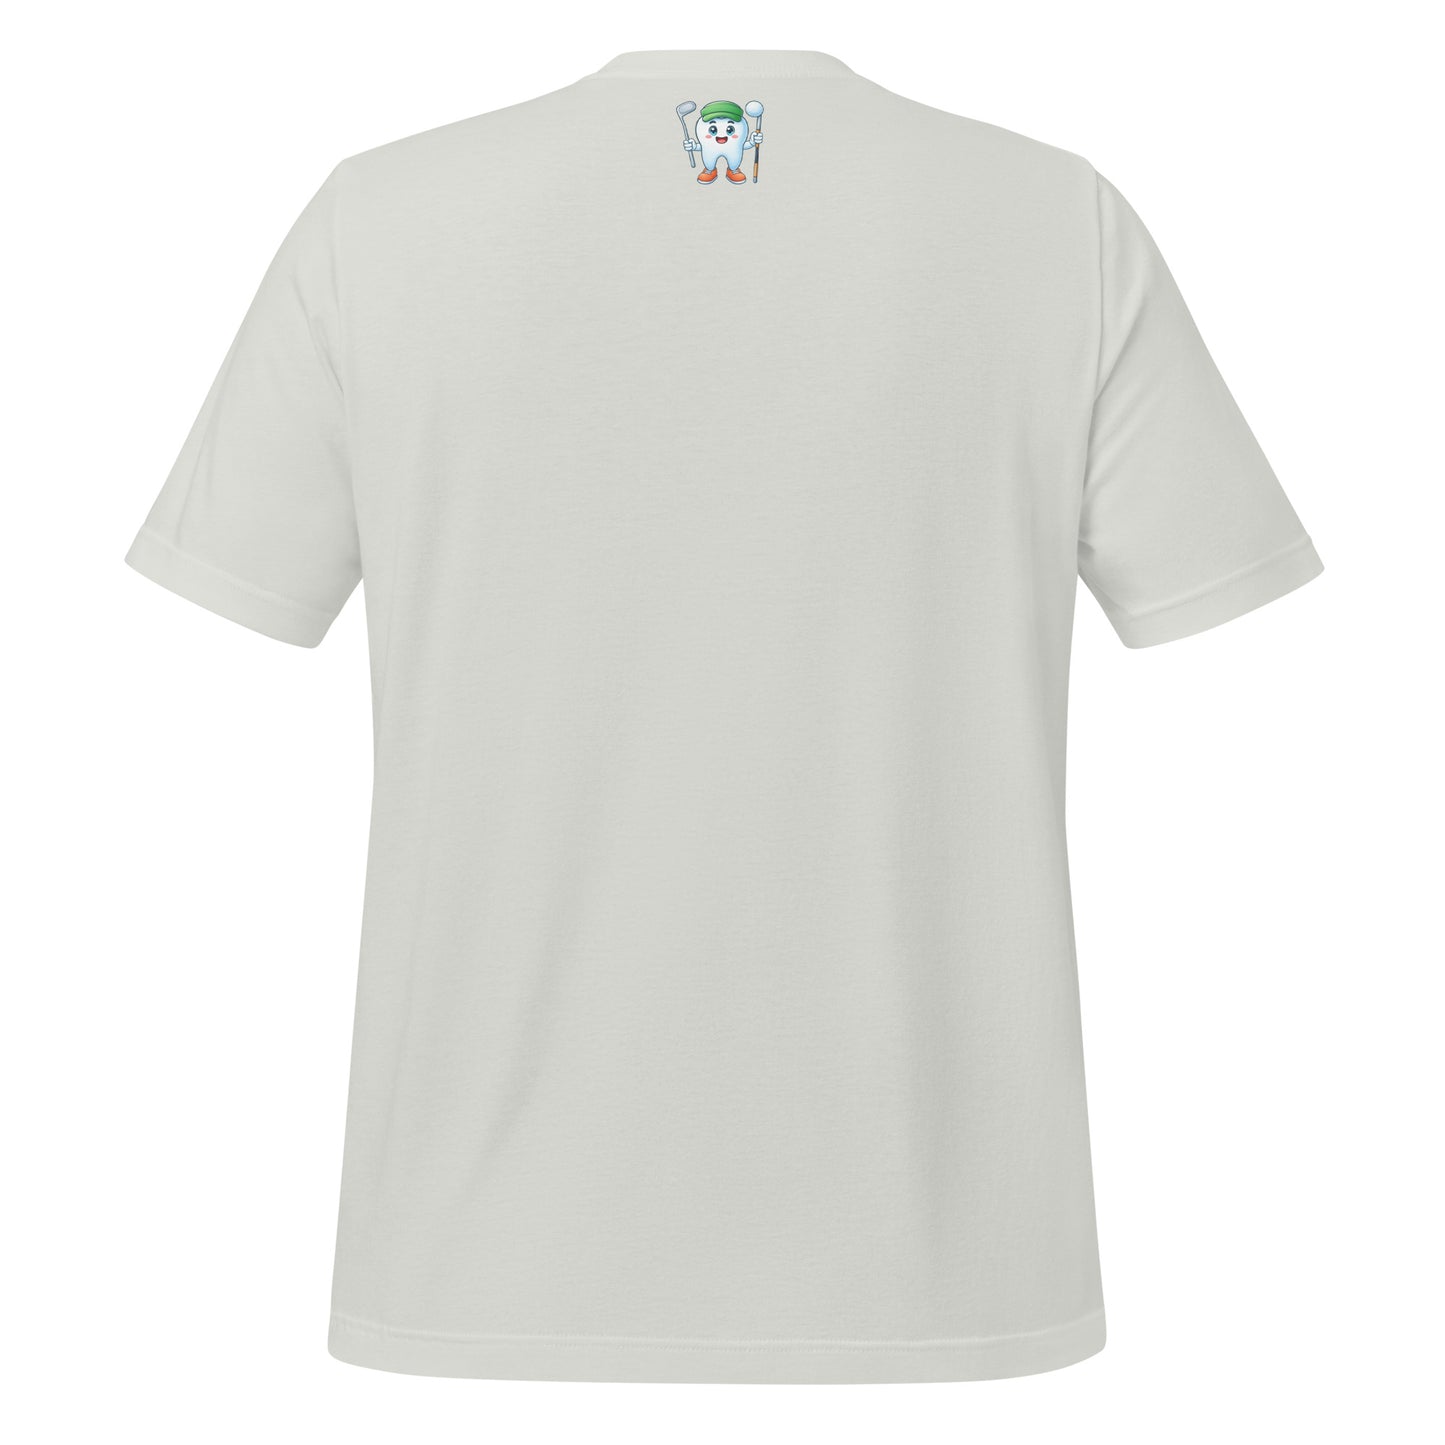 Cute dentist t-shirt showcasing an adorable tooth character in golf attire, joyfully celebrating a ‘hole in one’ achievement, perfect for dentist and dental professionals seeking unique and thematic dental apparel. Silver color, back view.